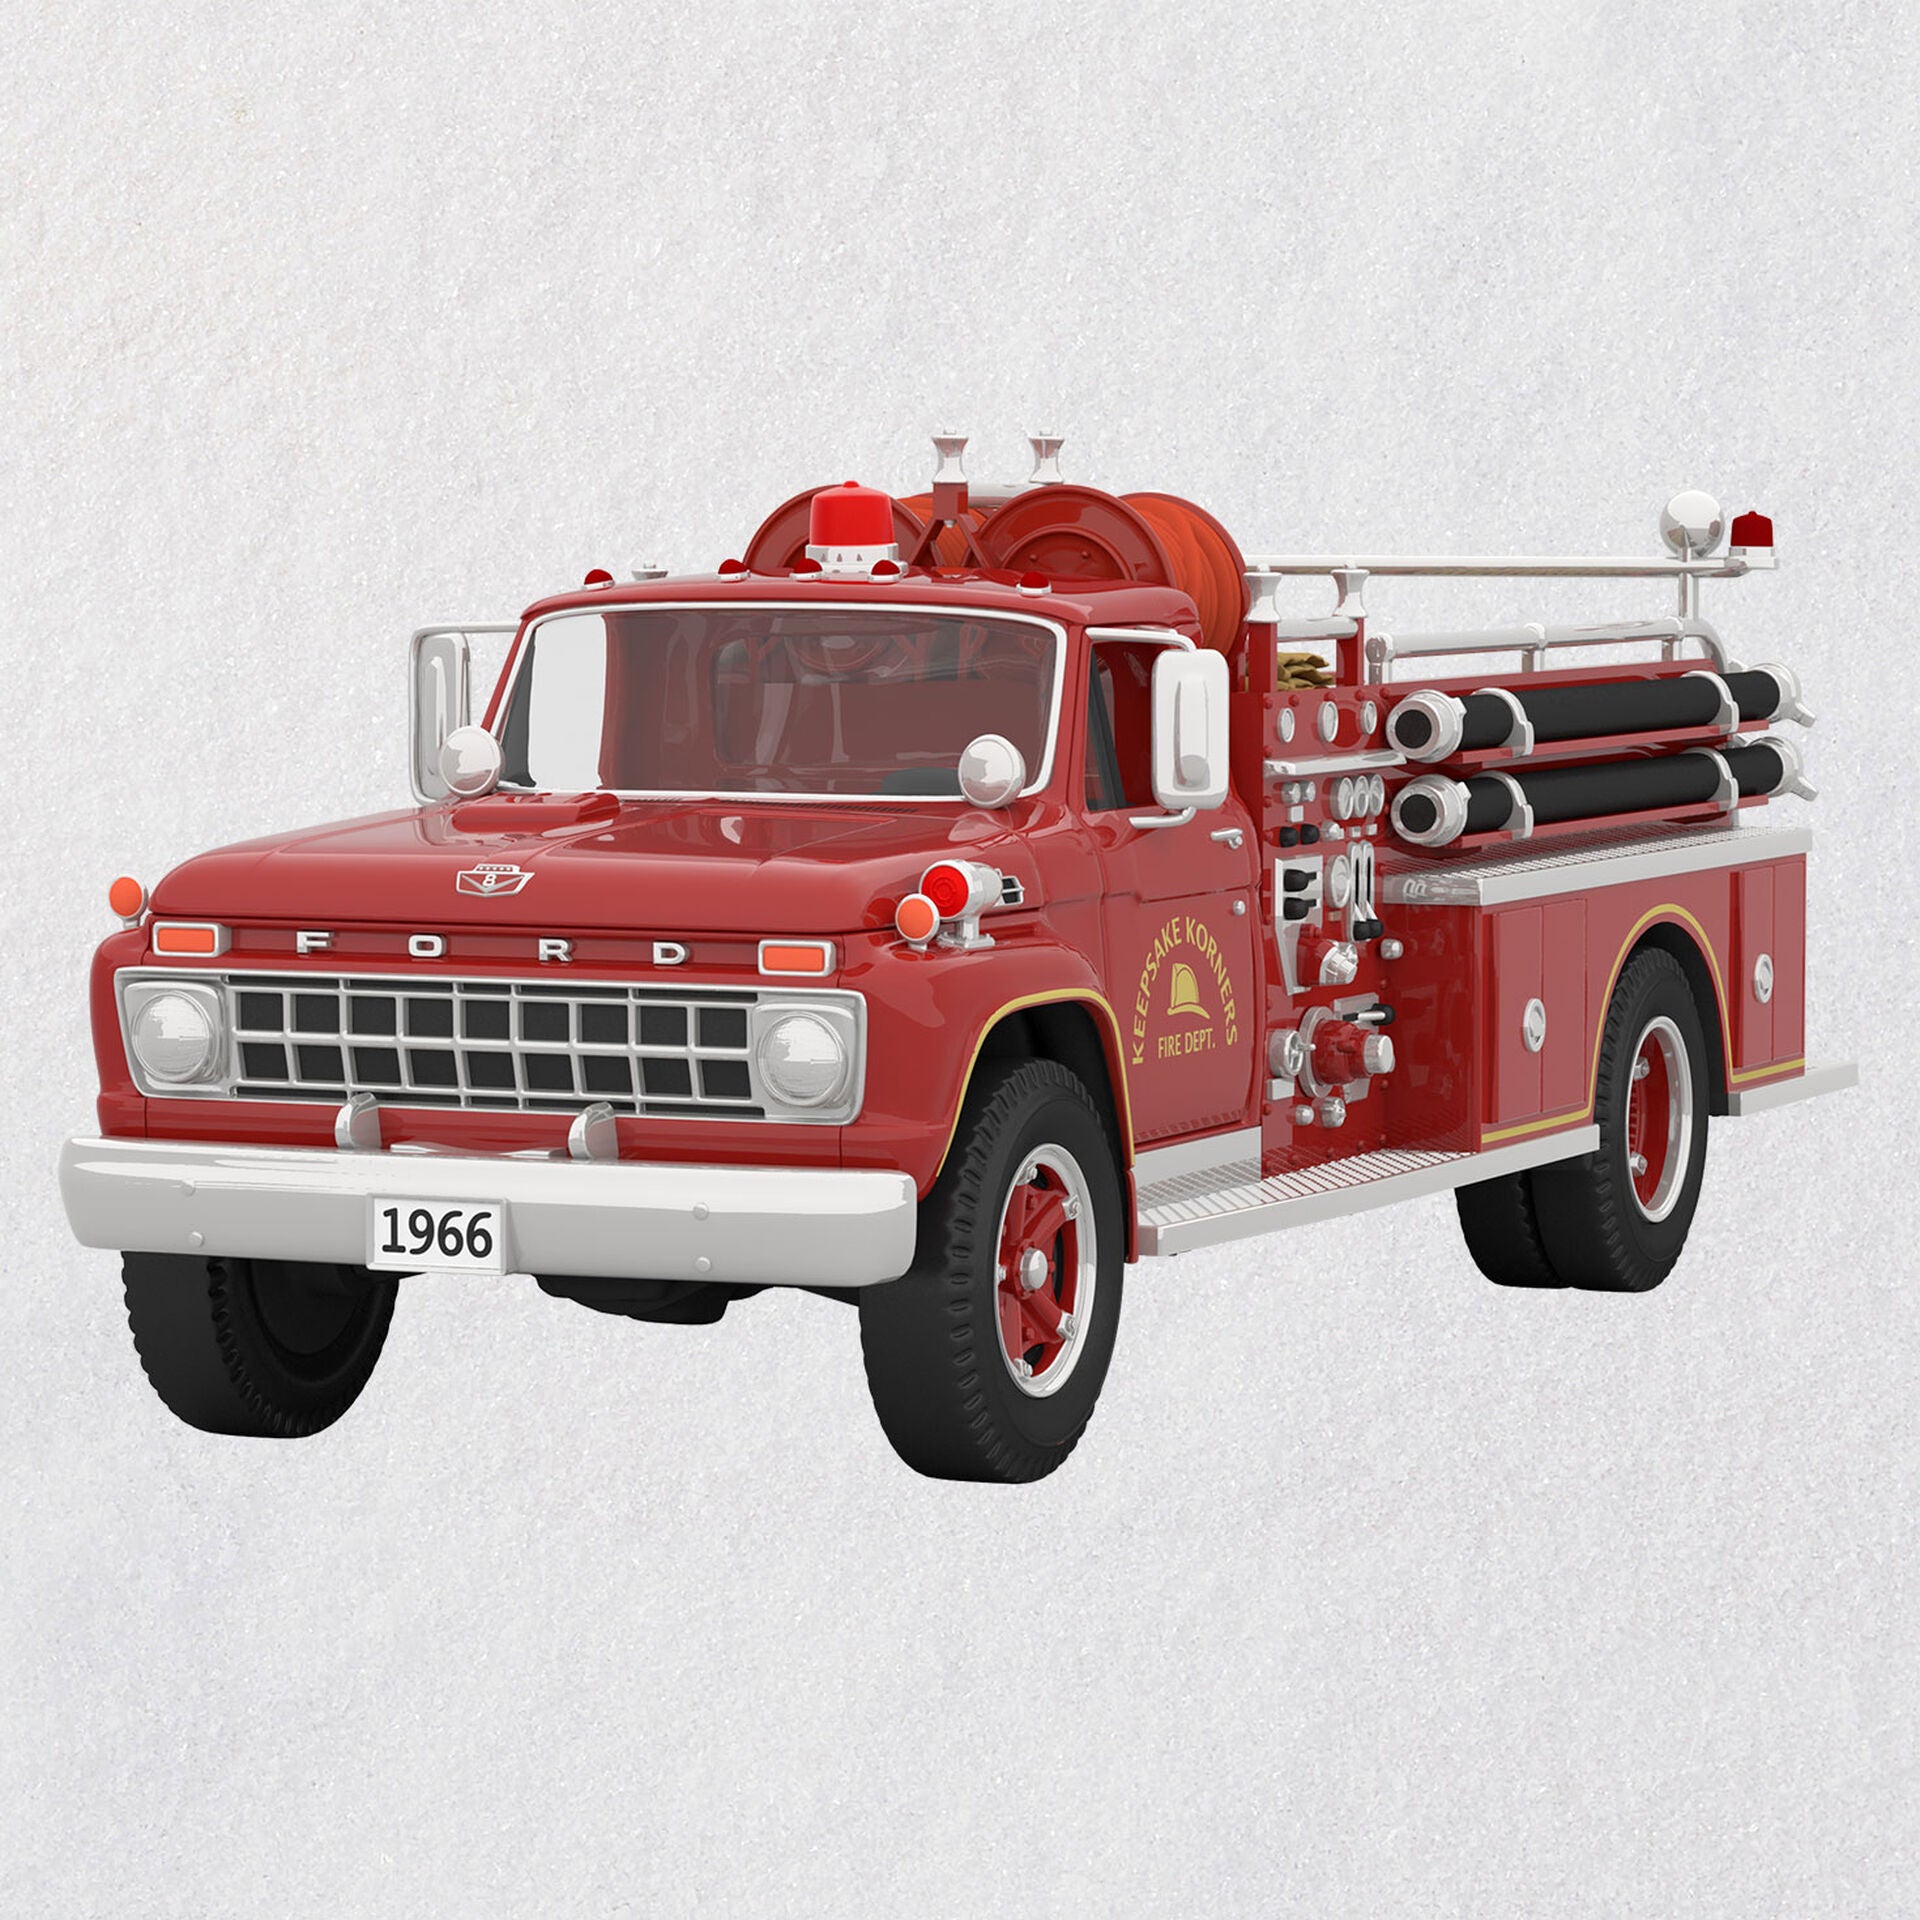 Light Gray Fire Brigade 1966 Ford Fire Engine 2021 Metal Ornament With Light